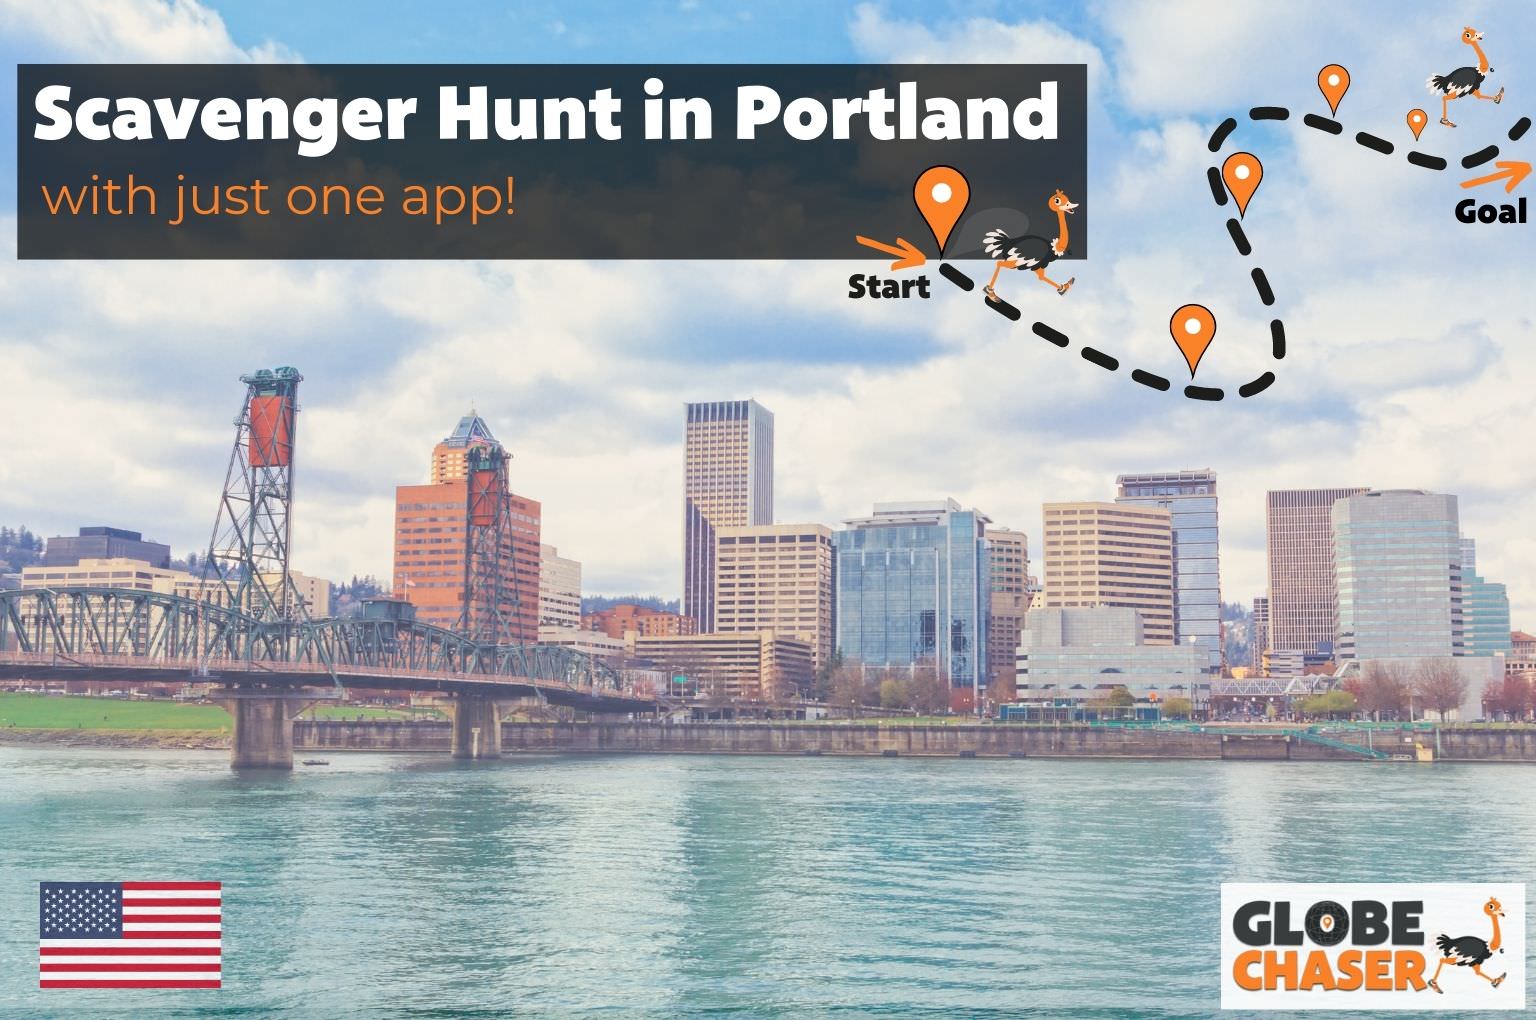 Scavenger Hunt in Portland, USA - Family Activities with the Globe Chaser App for Outdoor Fun